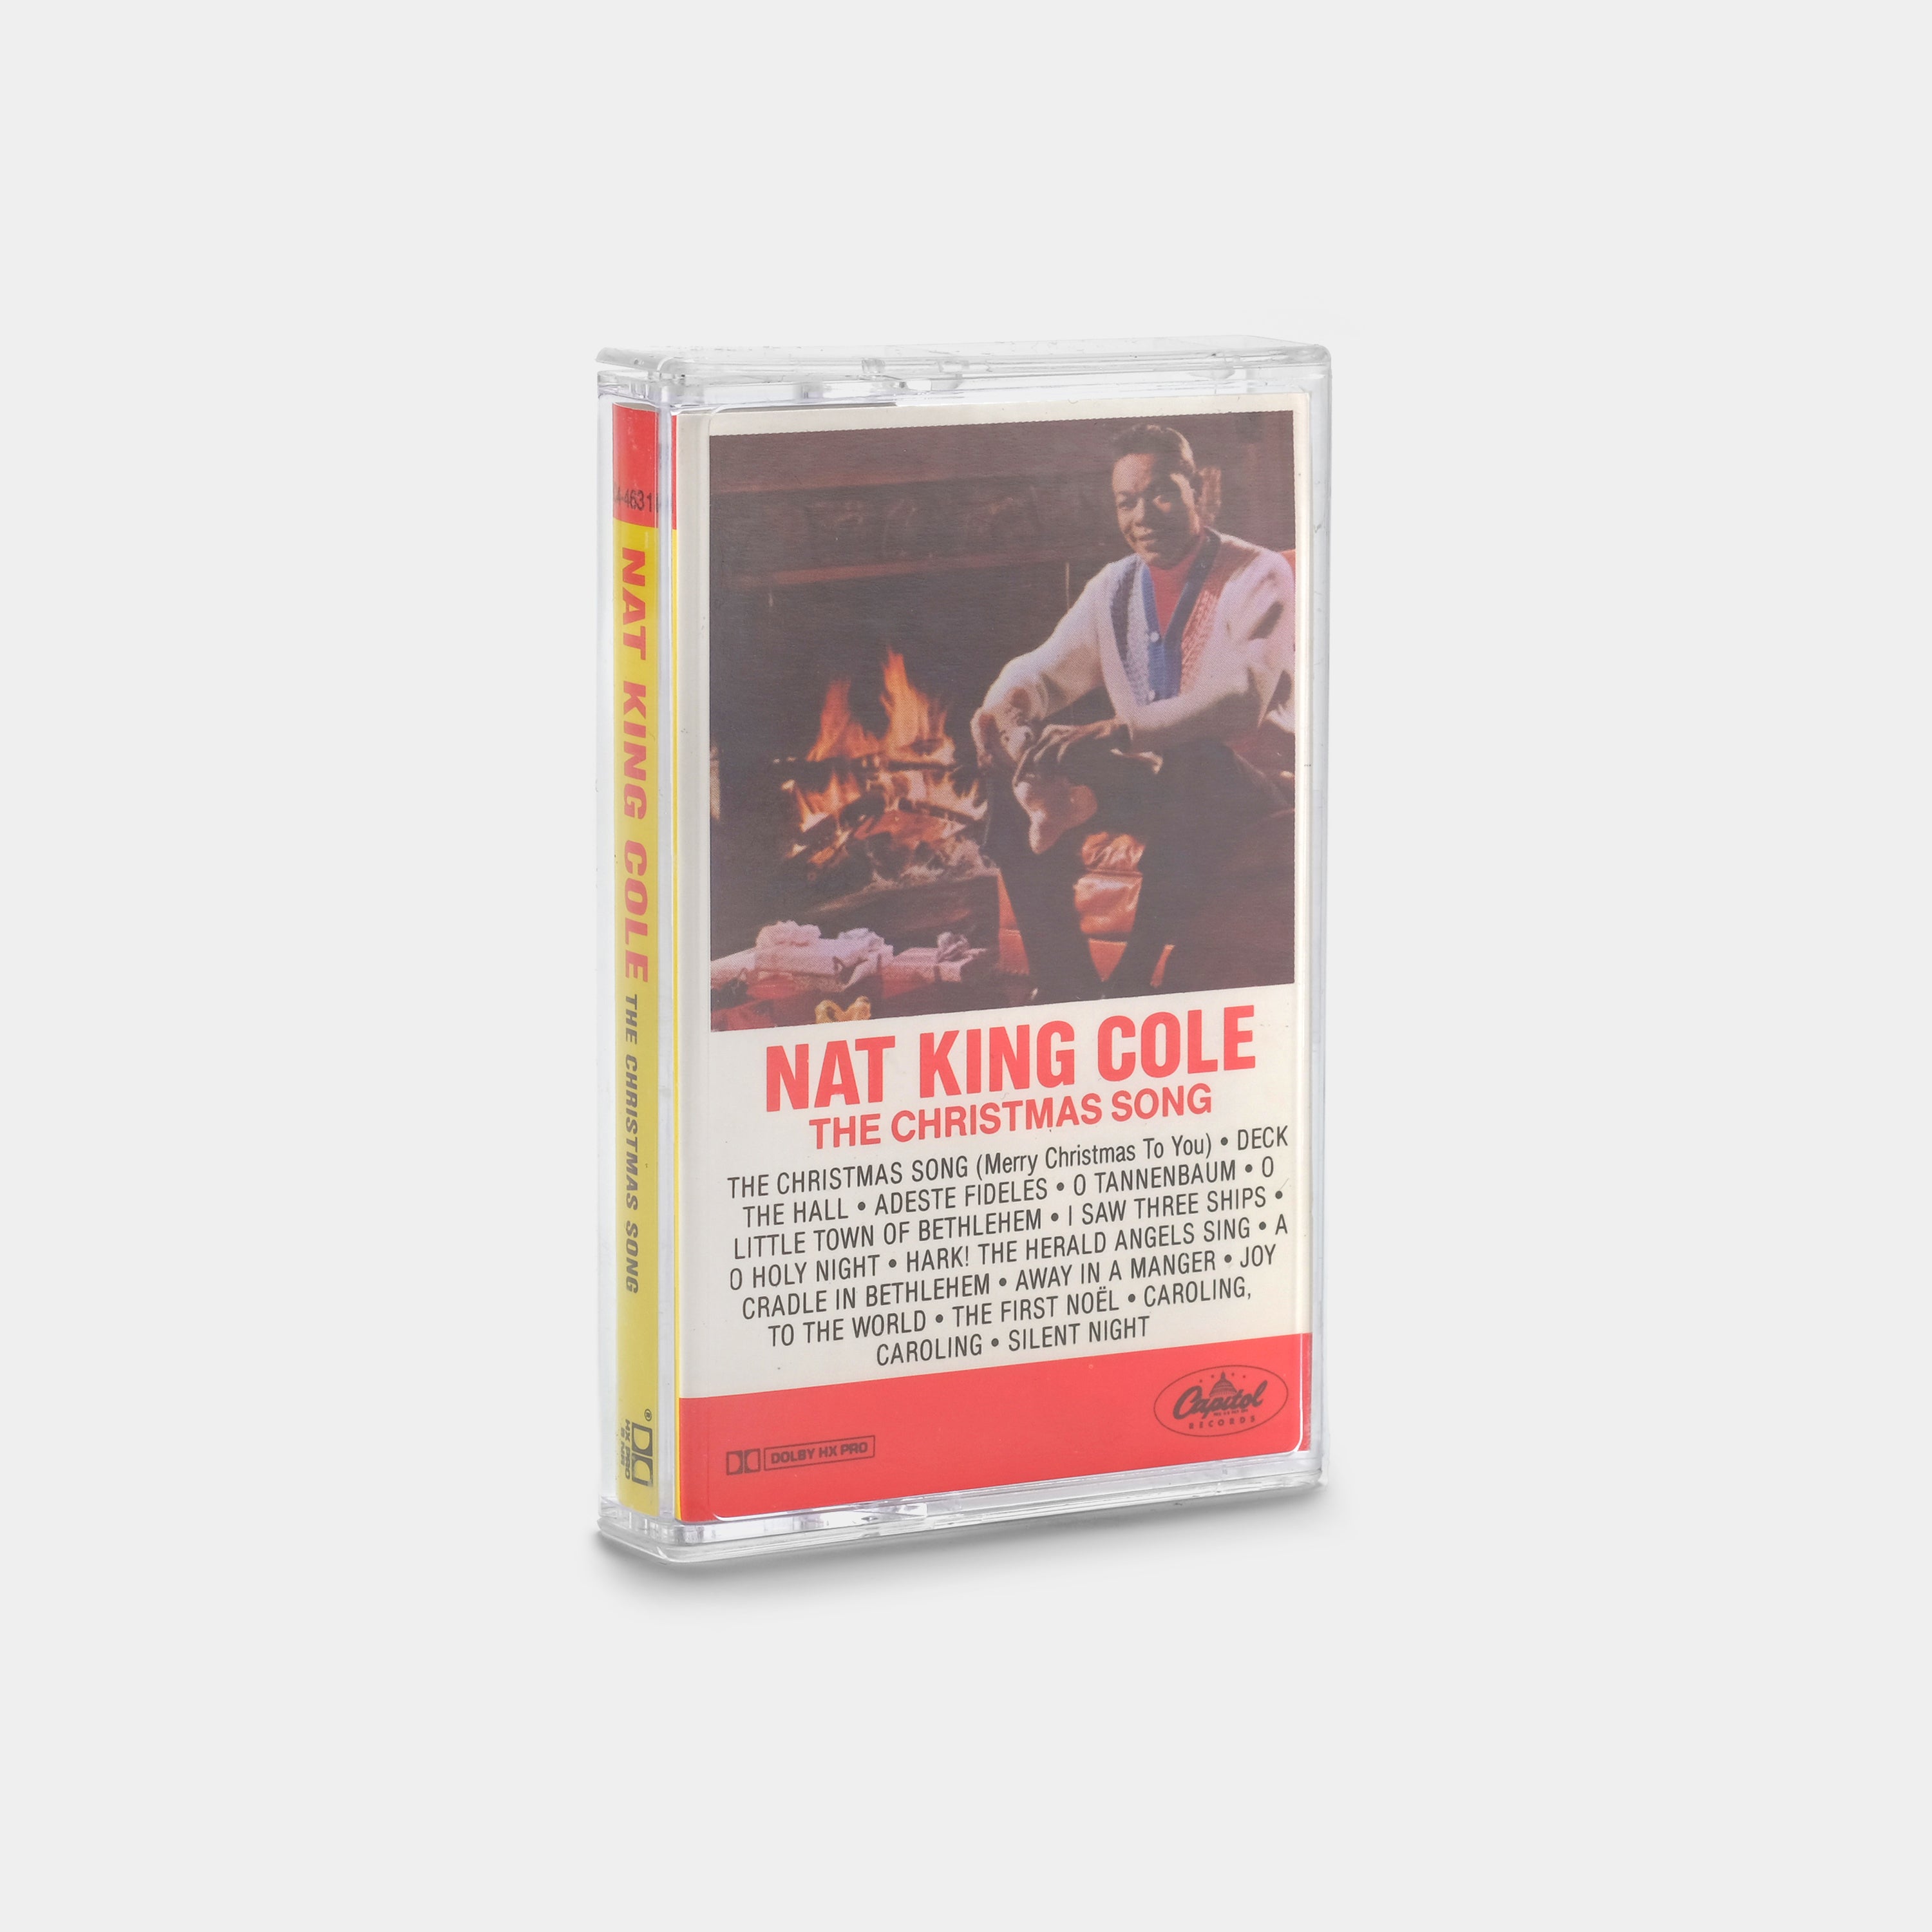 Nat King Cole - The Christmas Song Cassette Tape